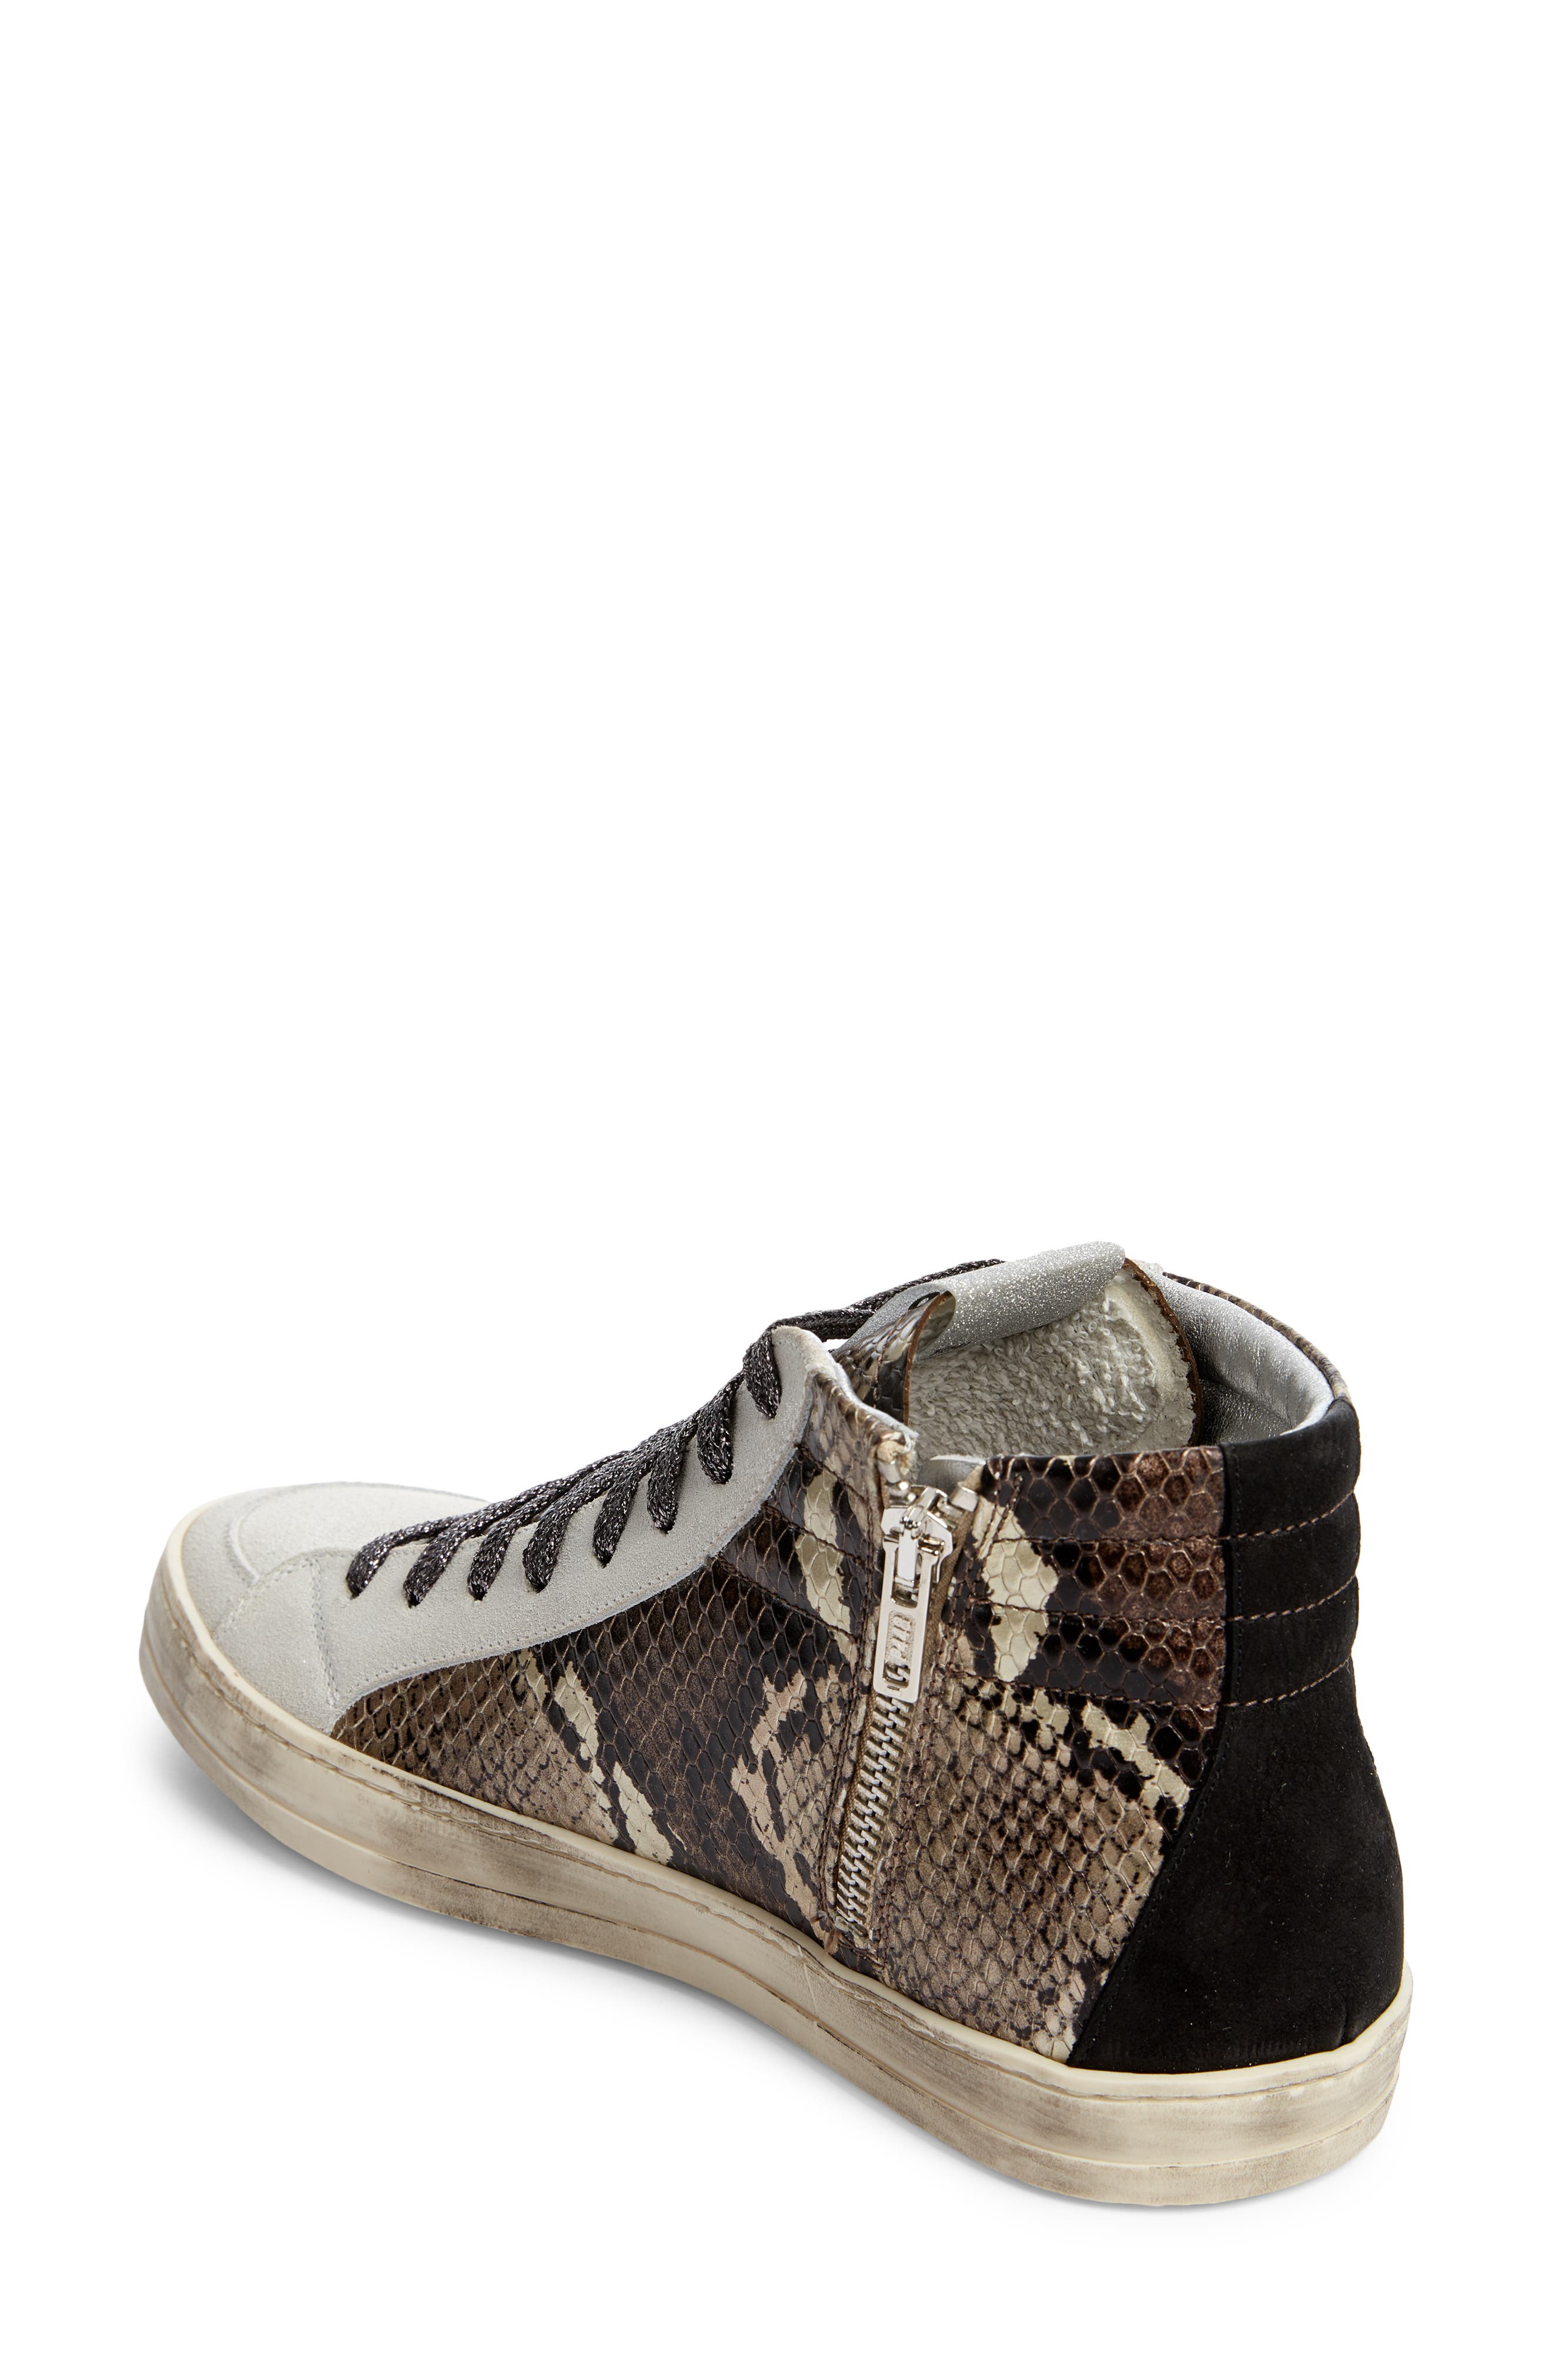 Canvas High Top Sneaker Casual Skate Shoe Mens Womens Rattlesnake Warning Dont Tread On Me